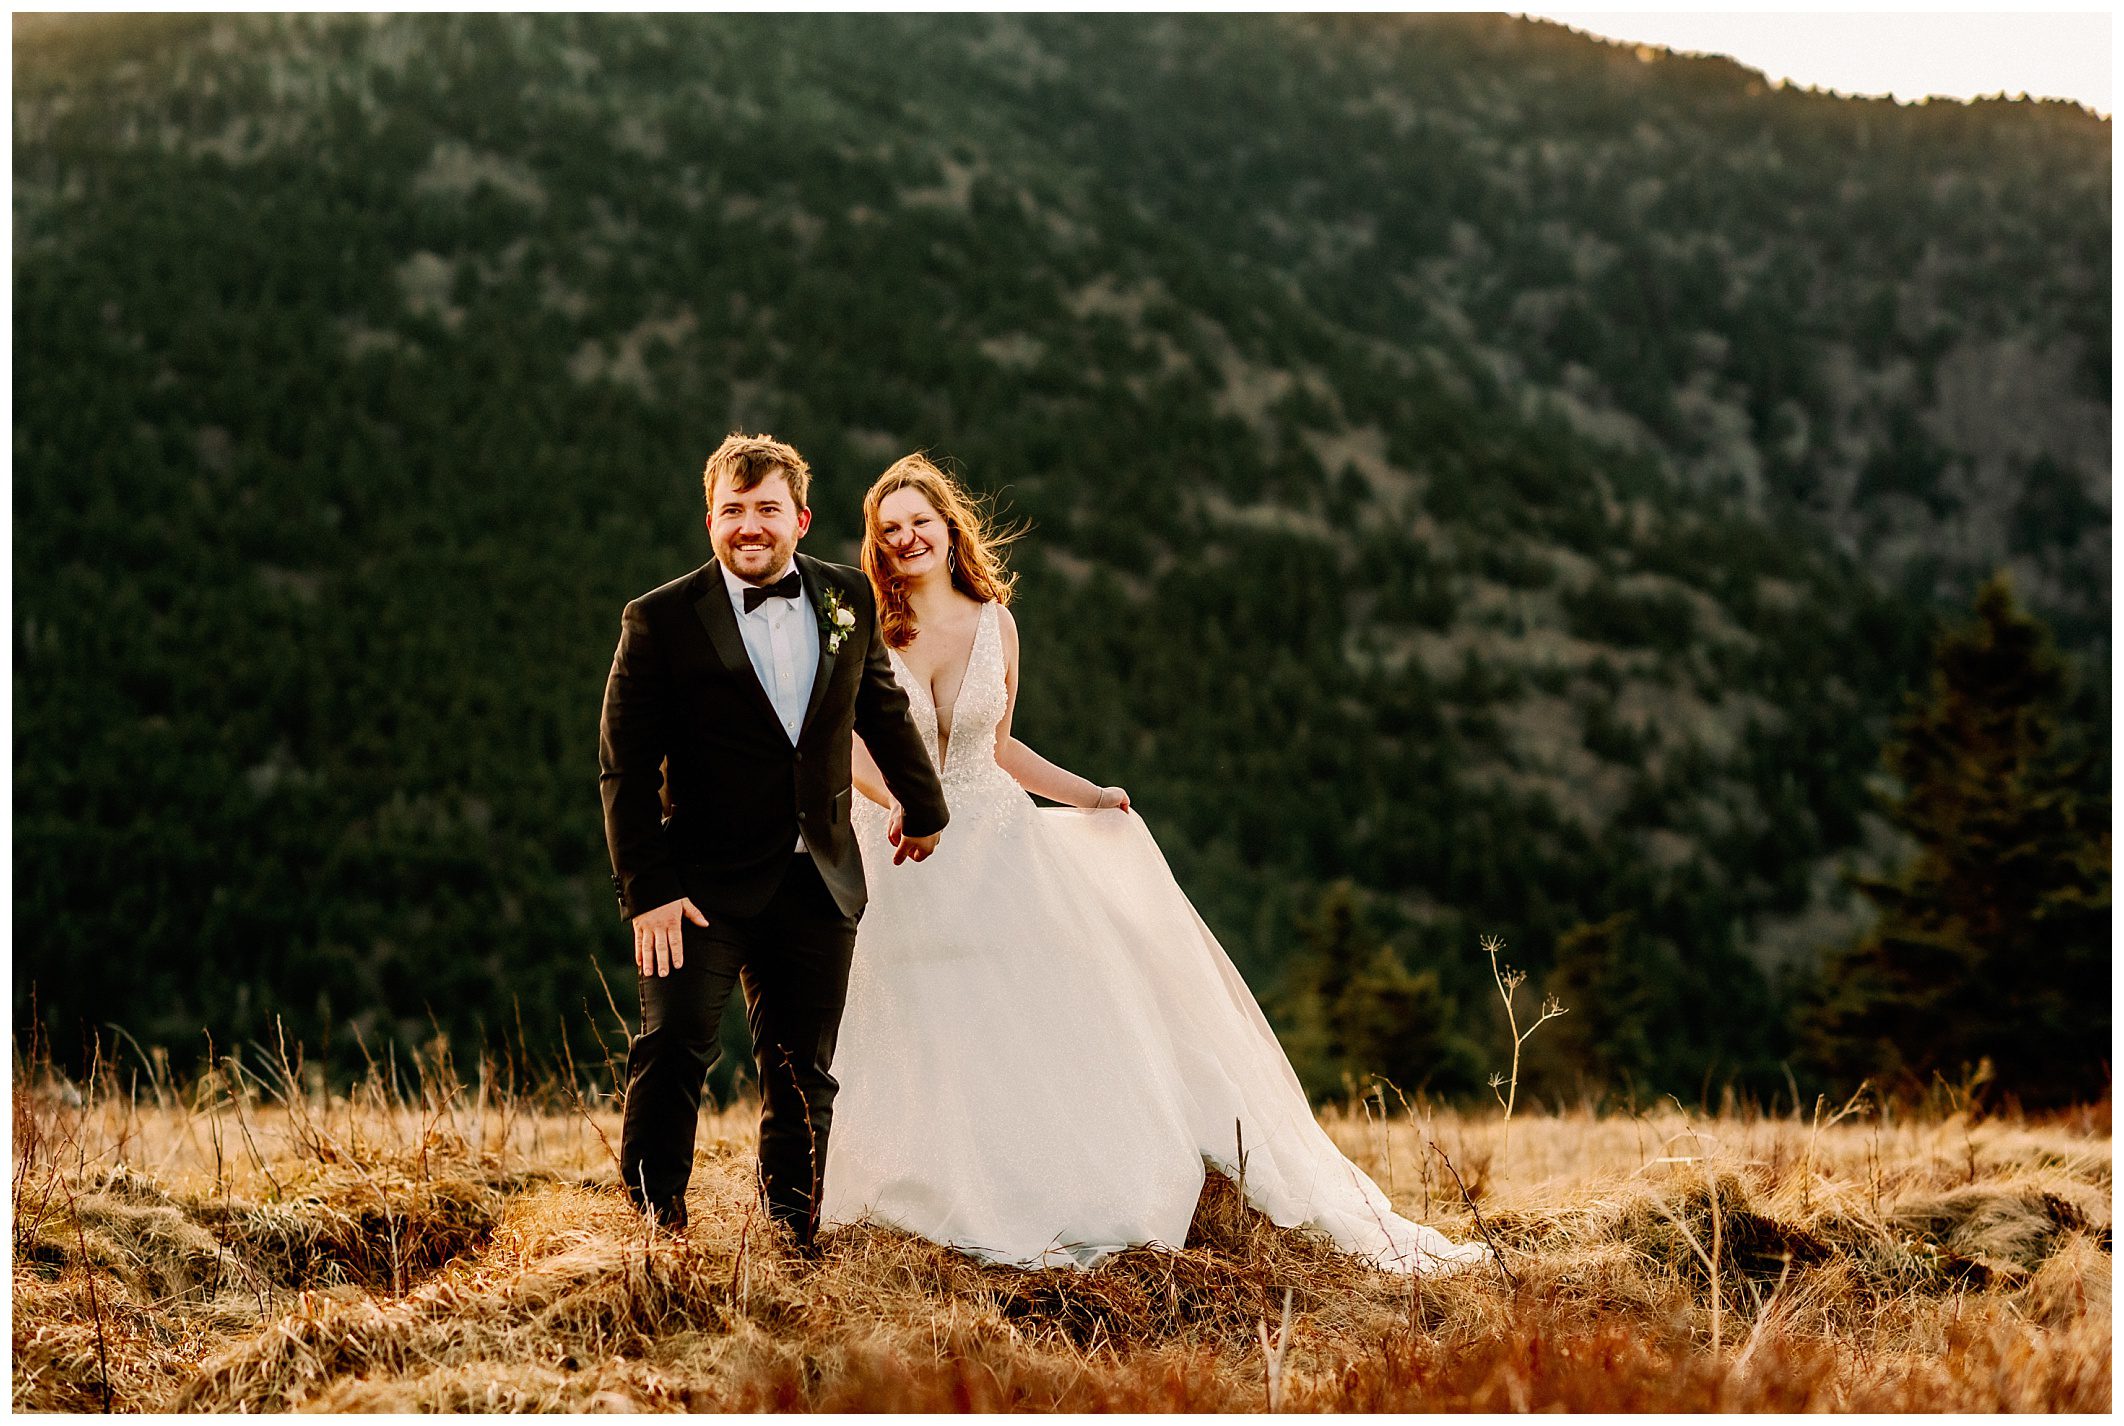 Winter elopement at Carvers Gap in NC | All inclusive elopements with Legacy and Legend